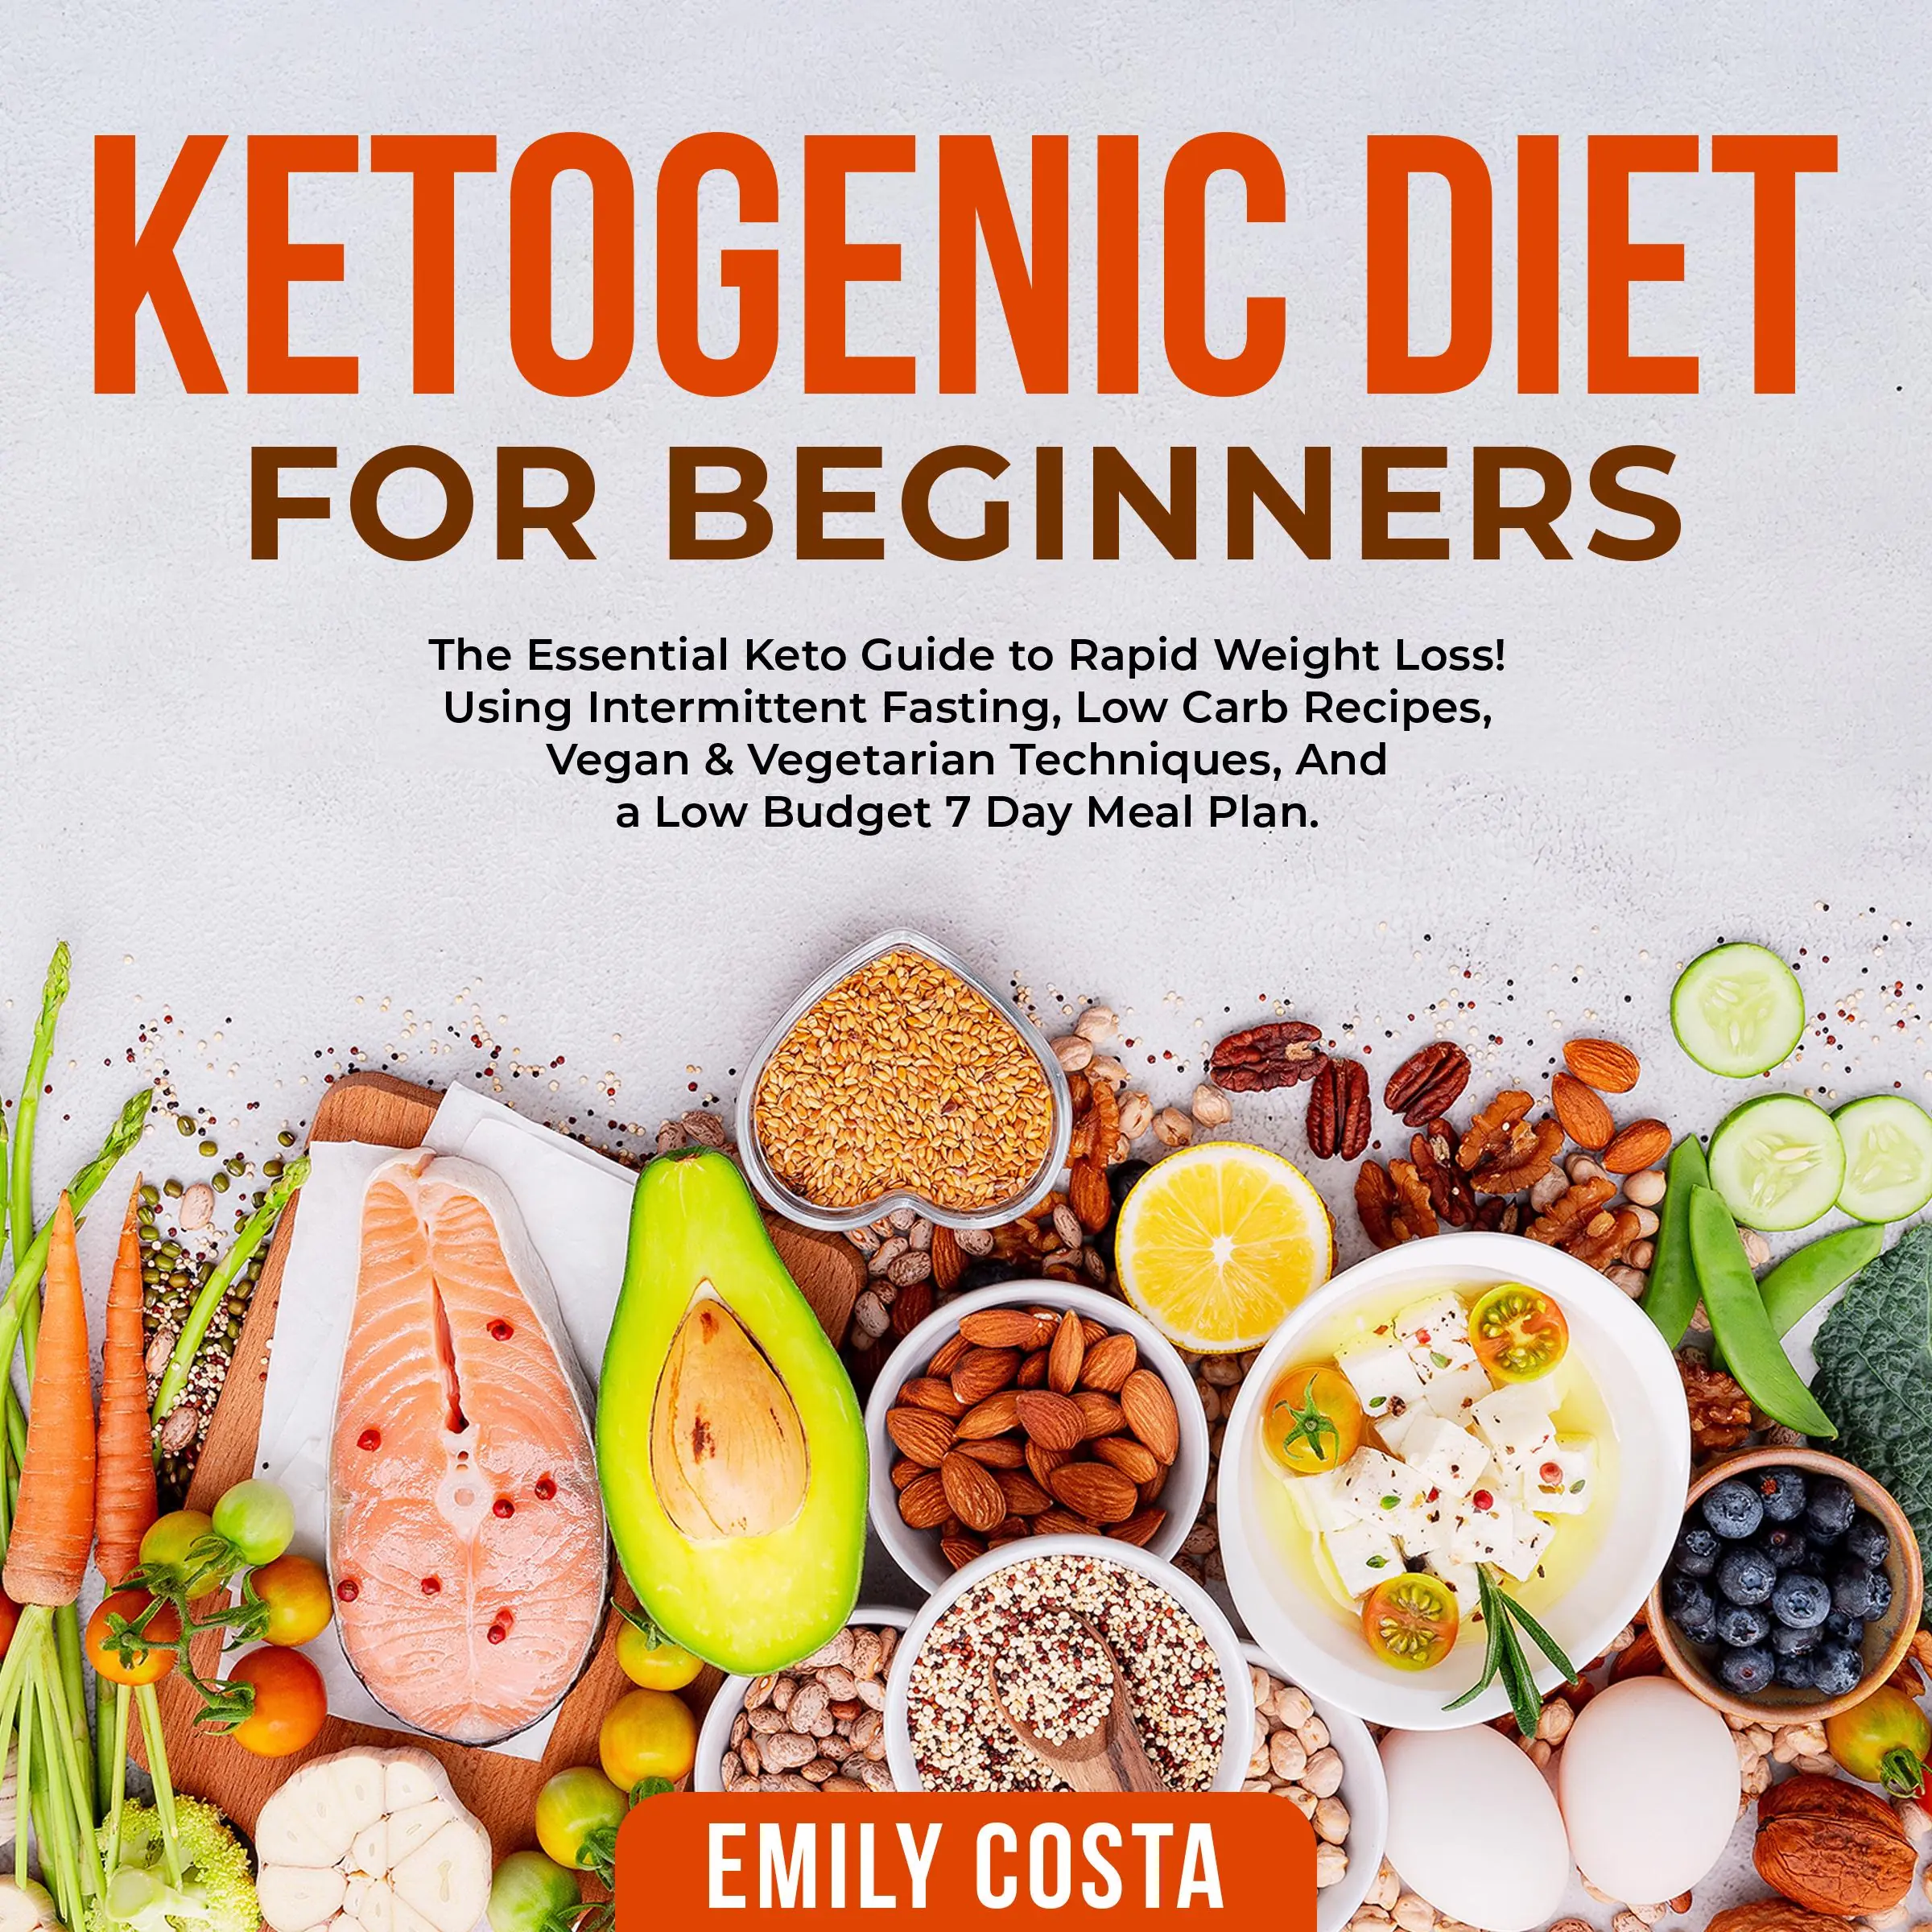 Ketogenic Diet for Beginners: The Essential Keto Guide to Rapid Weight Loss! Using Intermittent Fasting, Low Carb Recipes, Vegan & Vegetarian Techniques, And a Low Budget 7 Day Meal Plan. Audiobook by Emily Costa